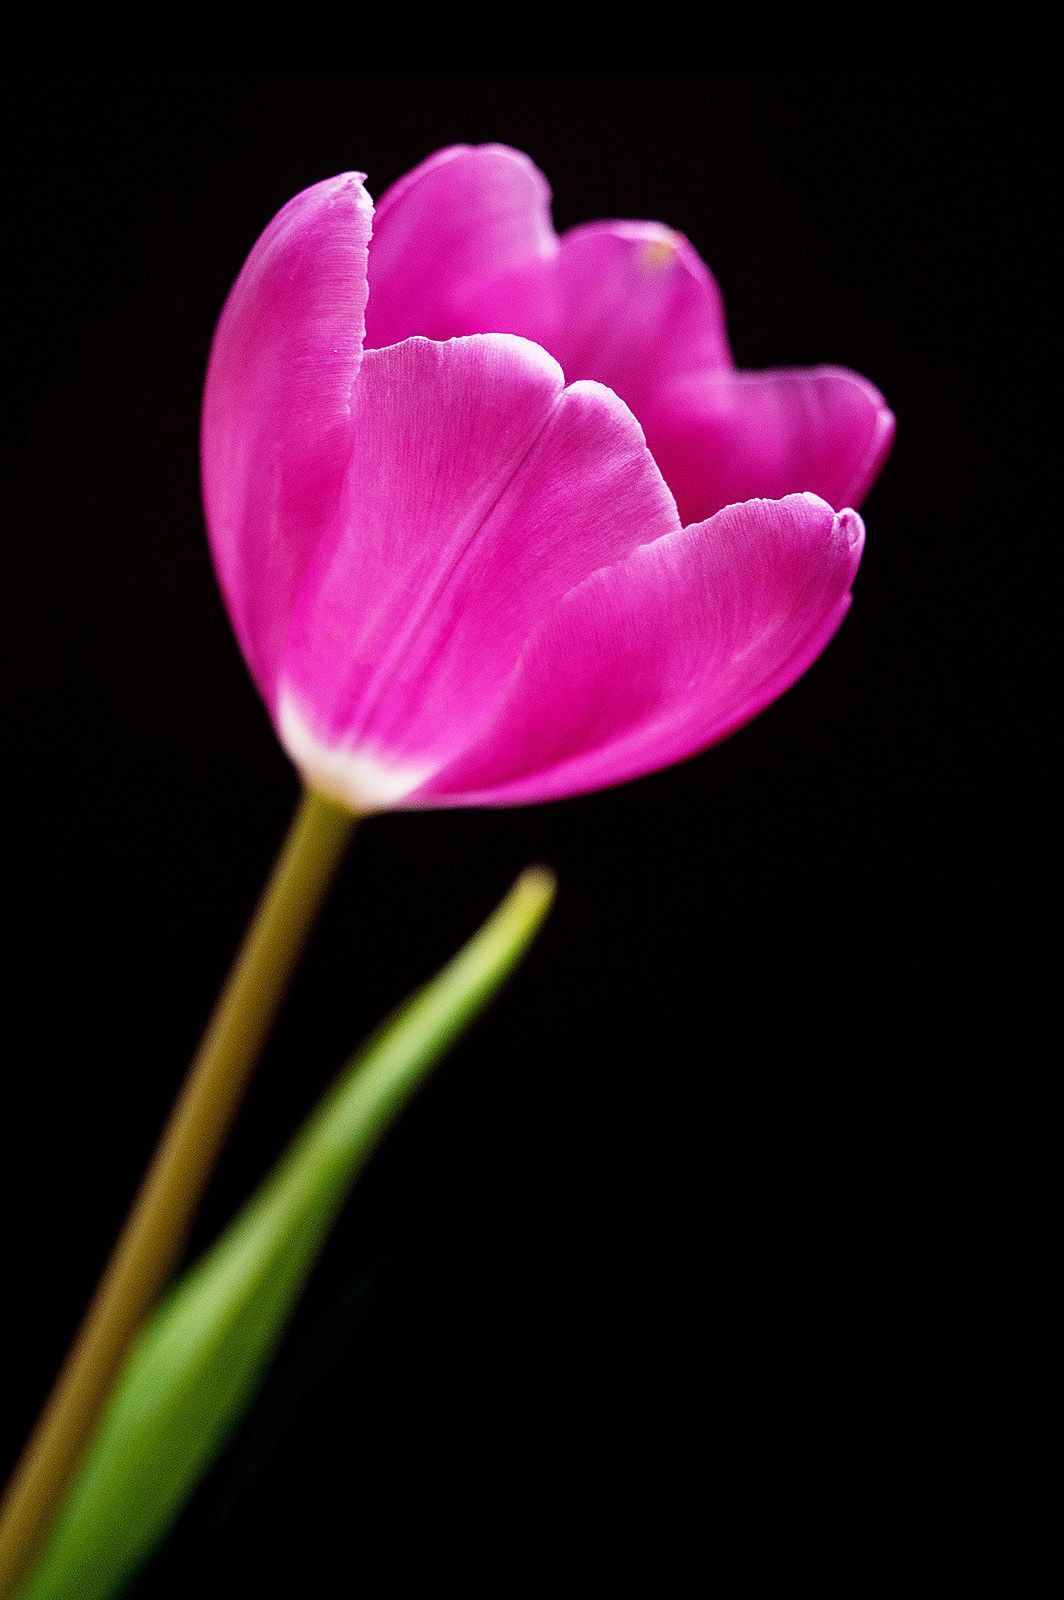 Simple beauty from a solo tulip.